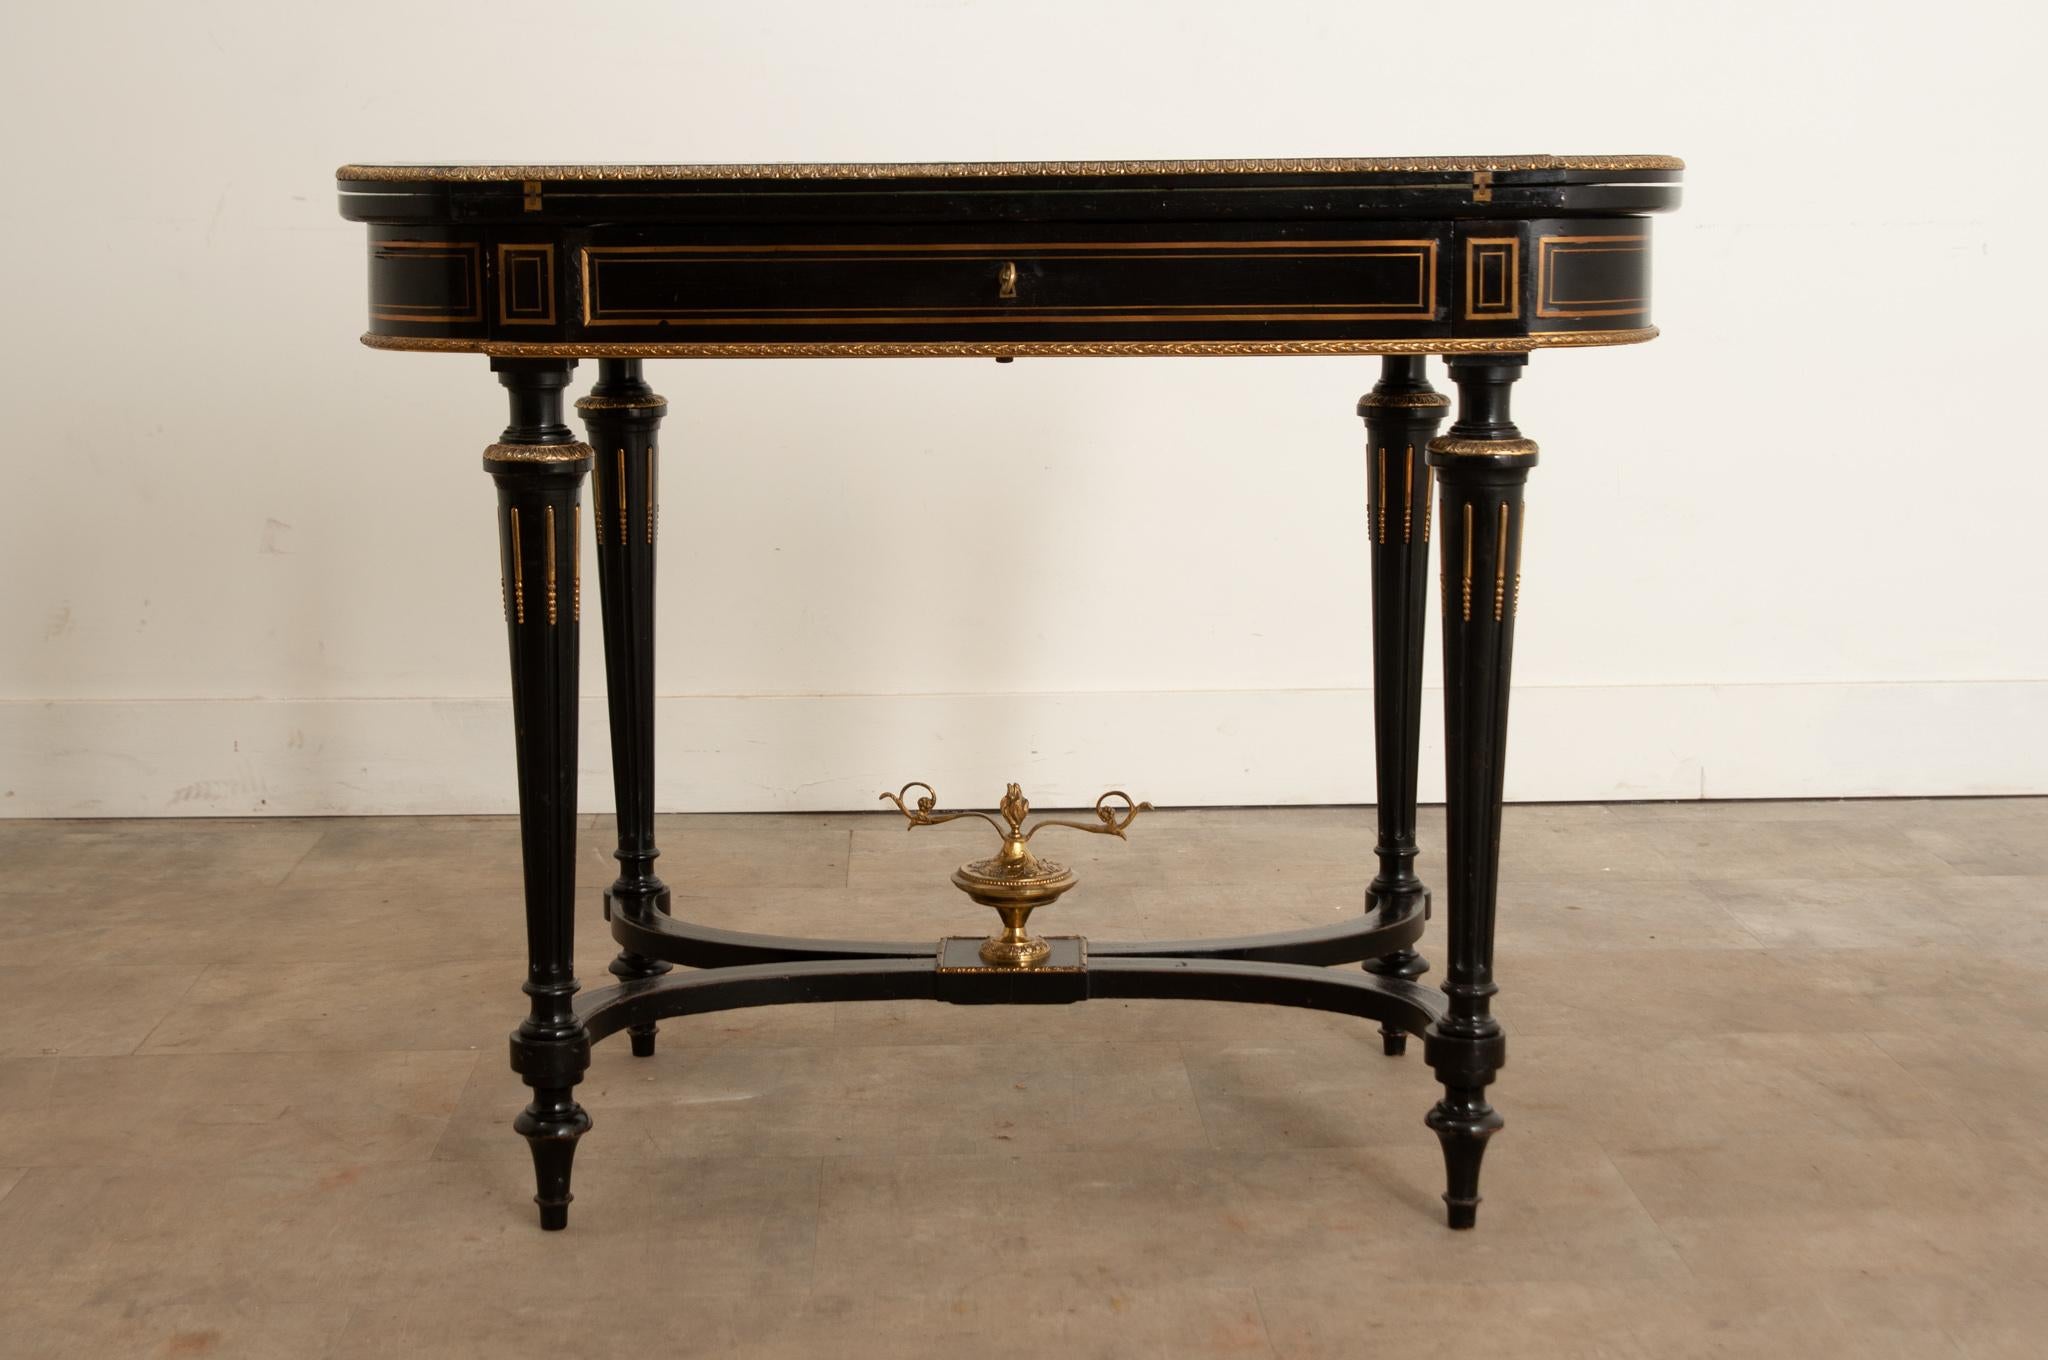 An elegant and refined Louis XVI style game table from 19th Century France. This outstanding antique table can serve multiple roles. It could be used as a console, center or occasional table, but one of the many things that makes this table special